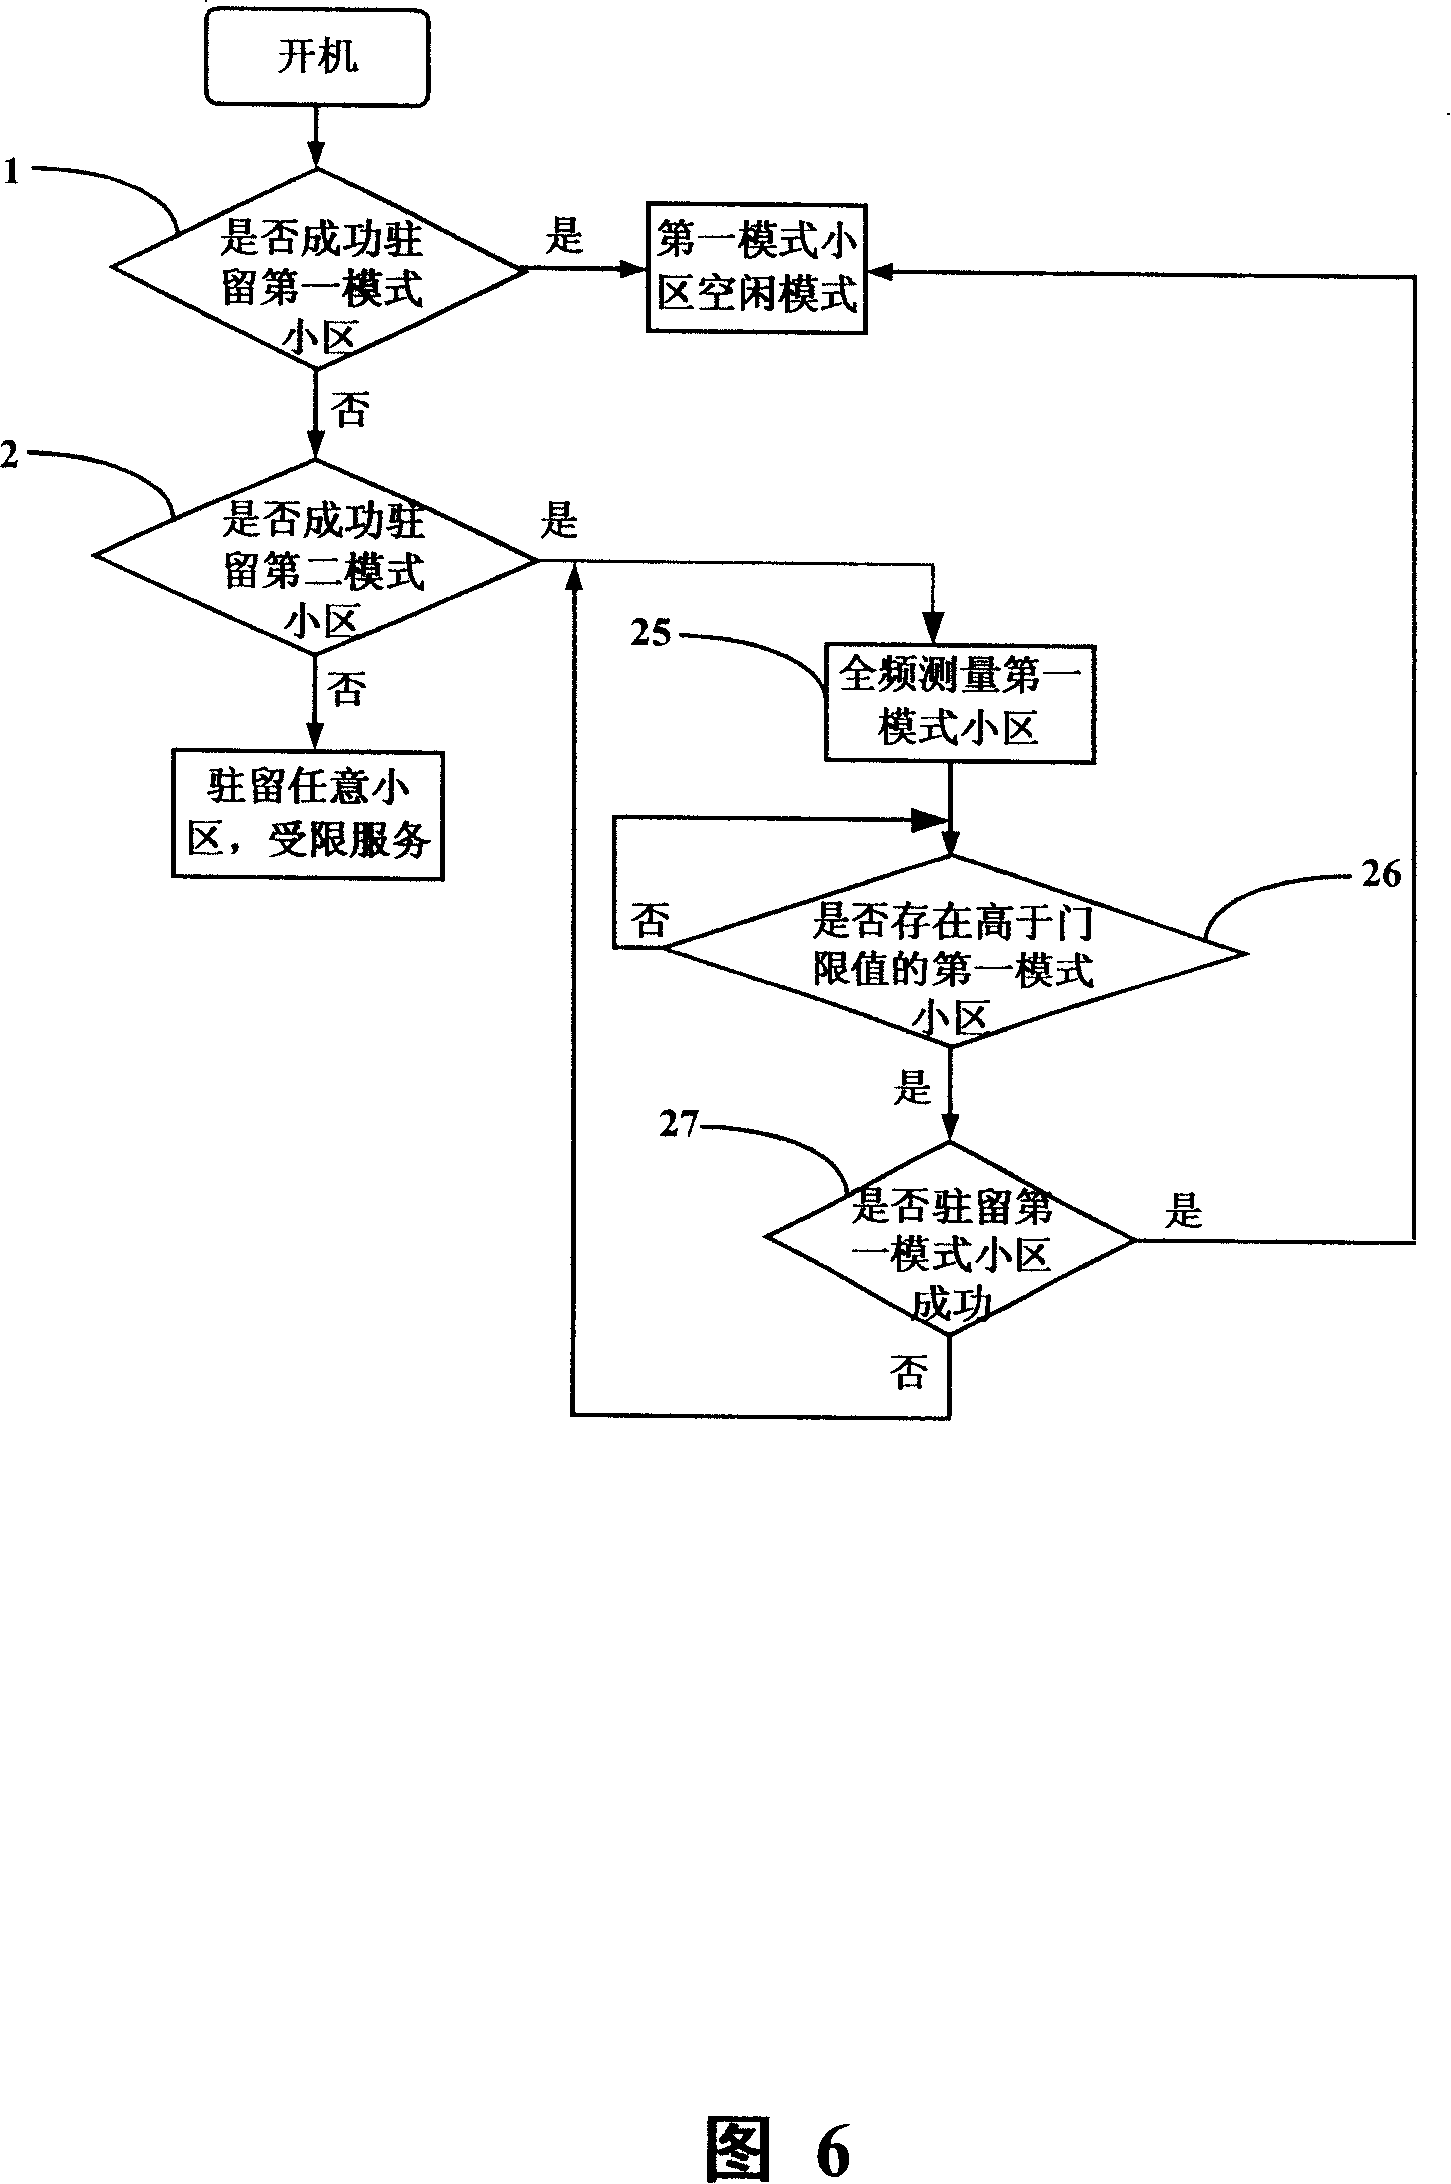 Double module terminal and its method for selecting resident network